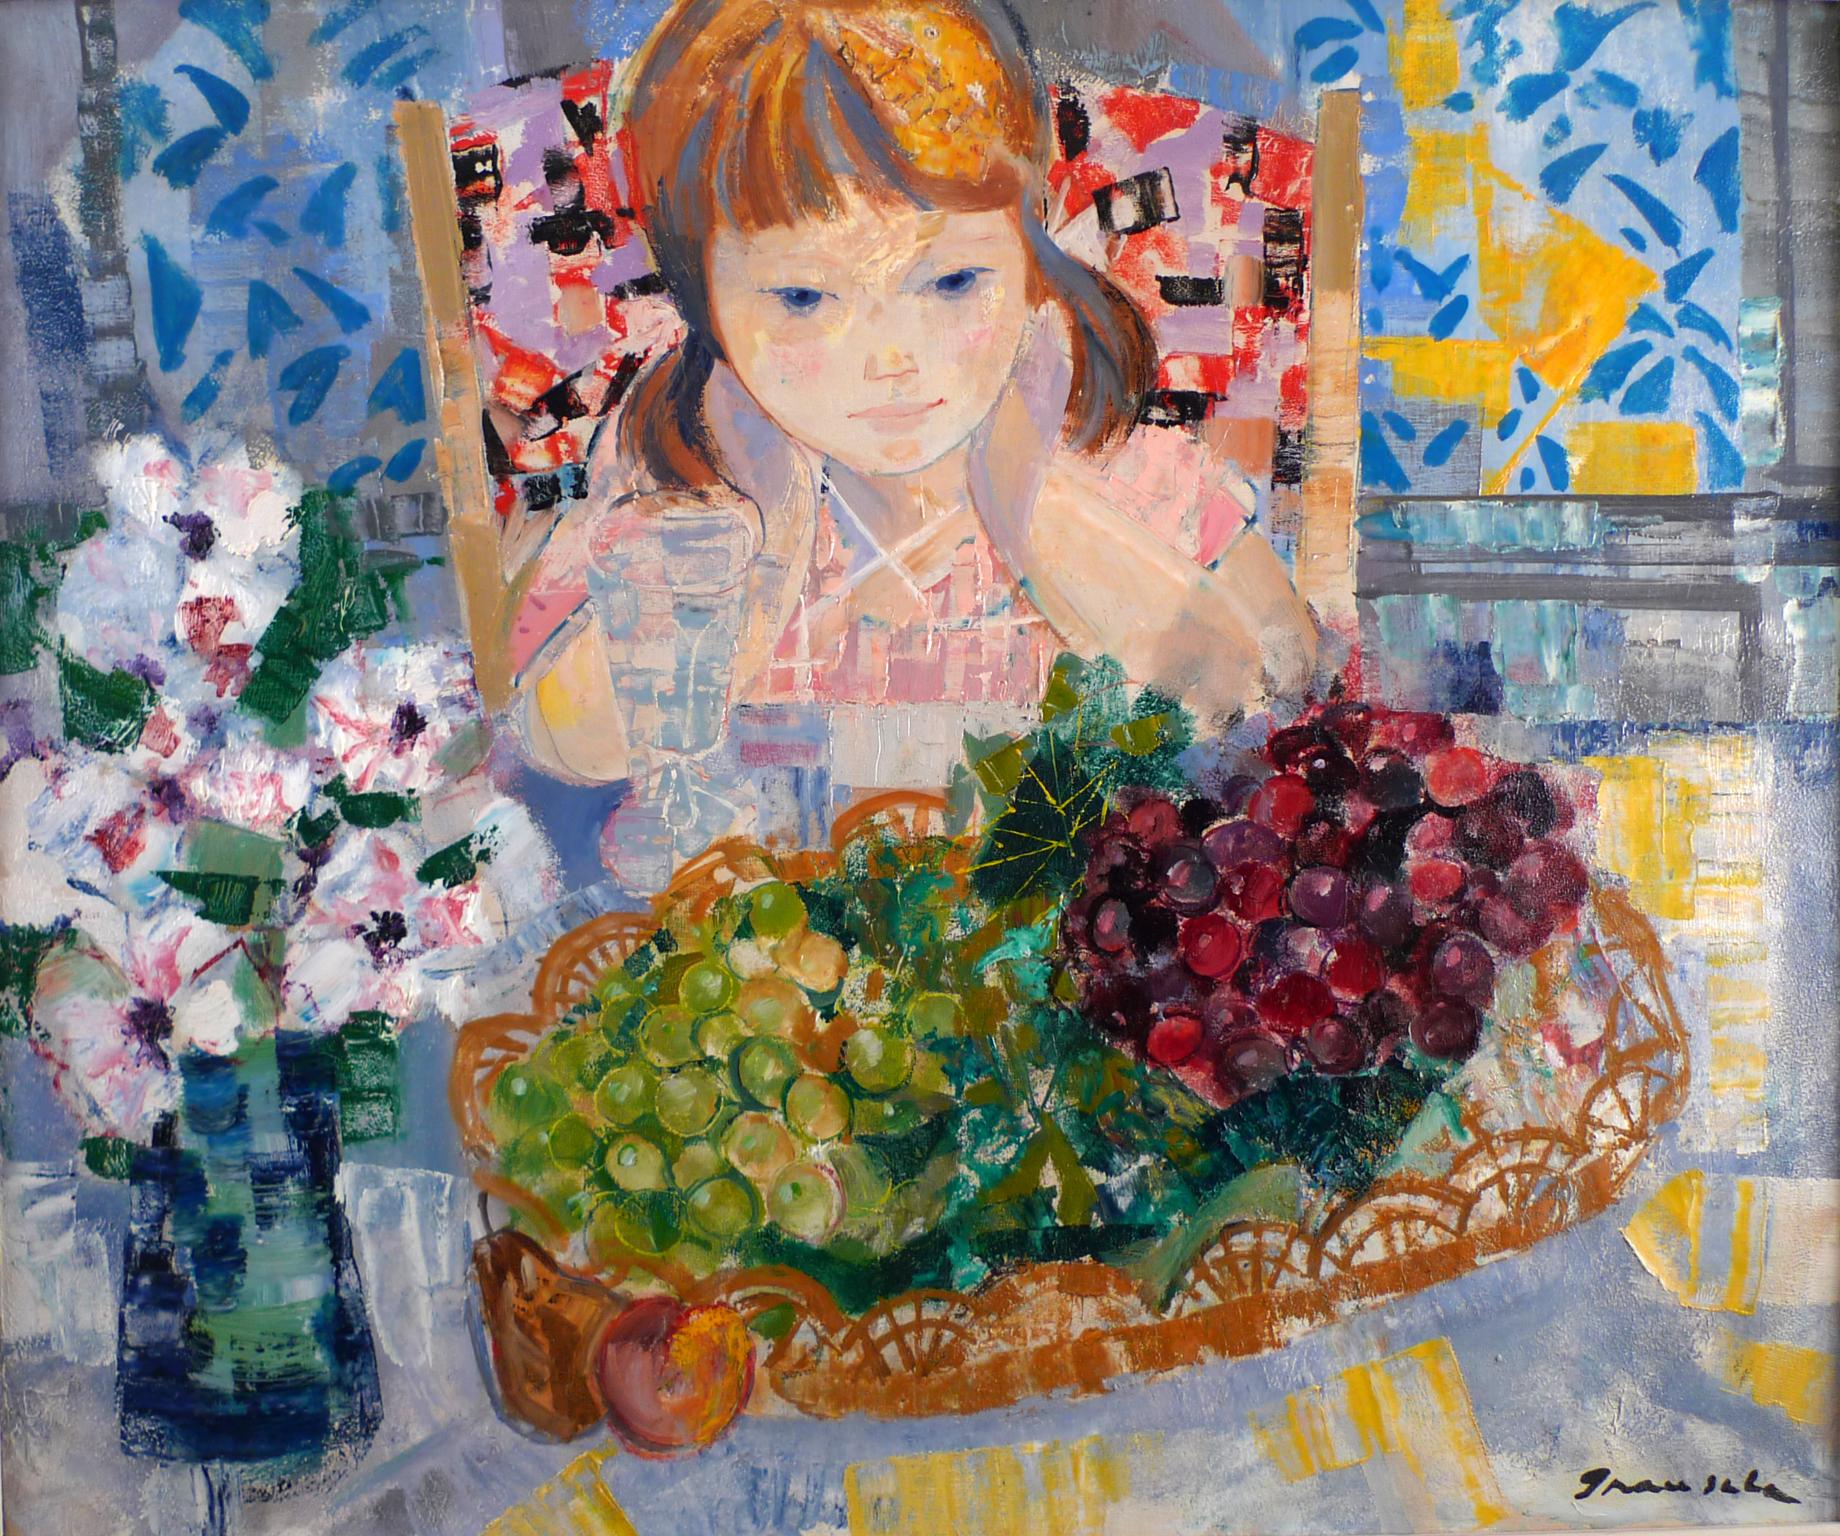 Emilio Grau Sala Interior Painting - "Young Girl at the Table with Grapes and Flowers", Oil on Canvas by E. Grau Sala